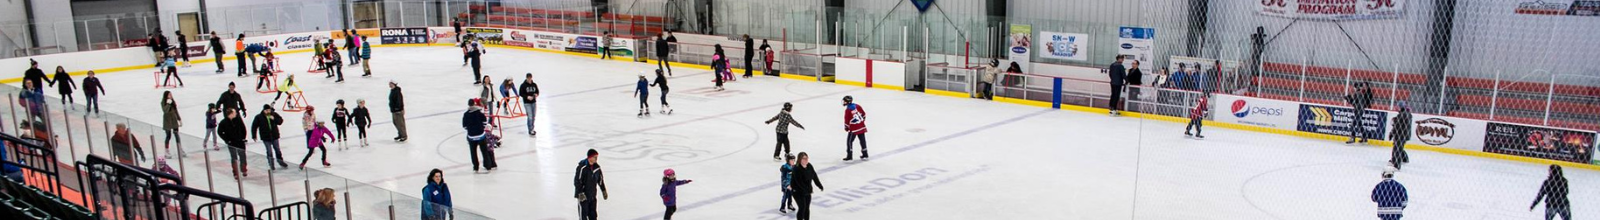 People skating on a rink